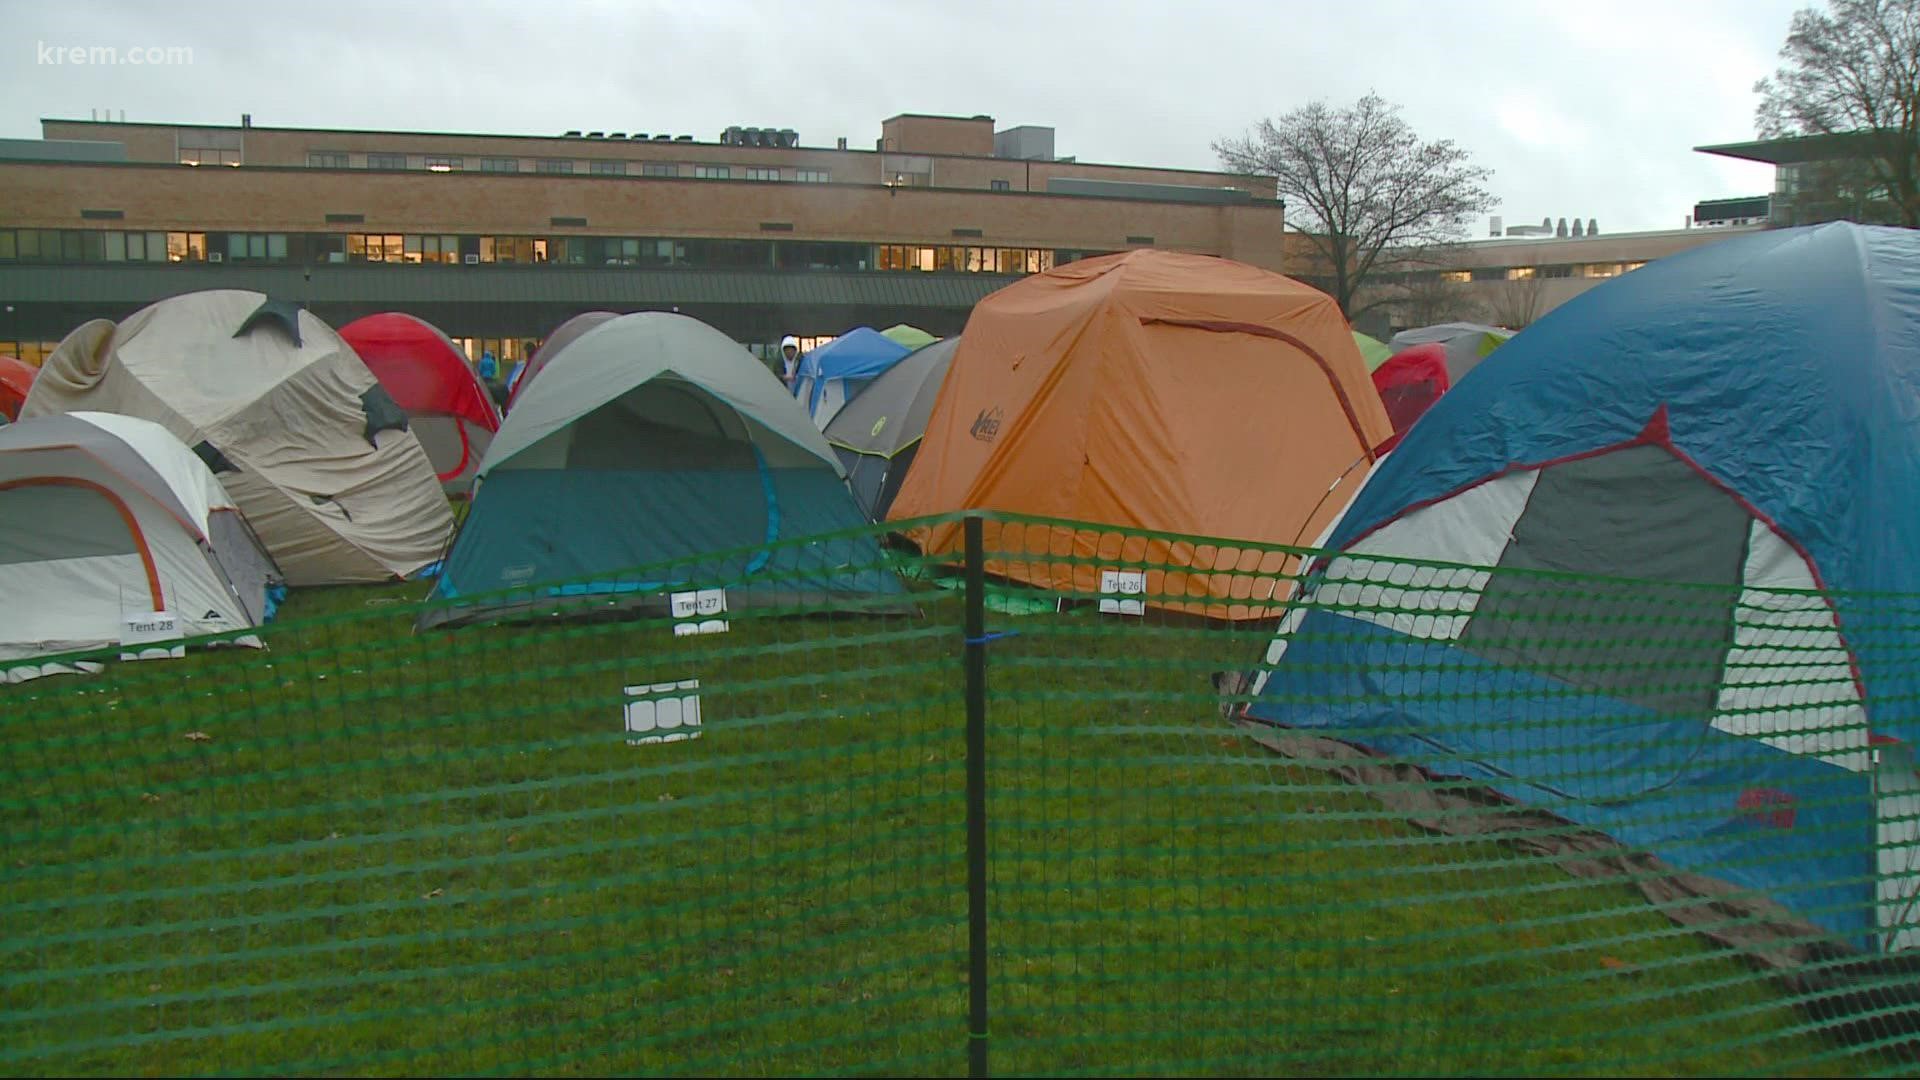 Tent city is back for the first time in over two years and students couldn't be more excited to participate in the Zag tradition